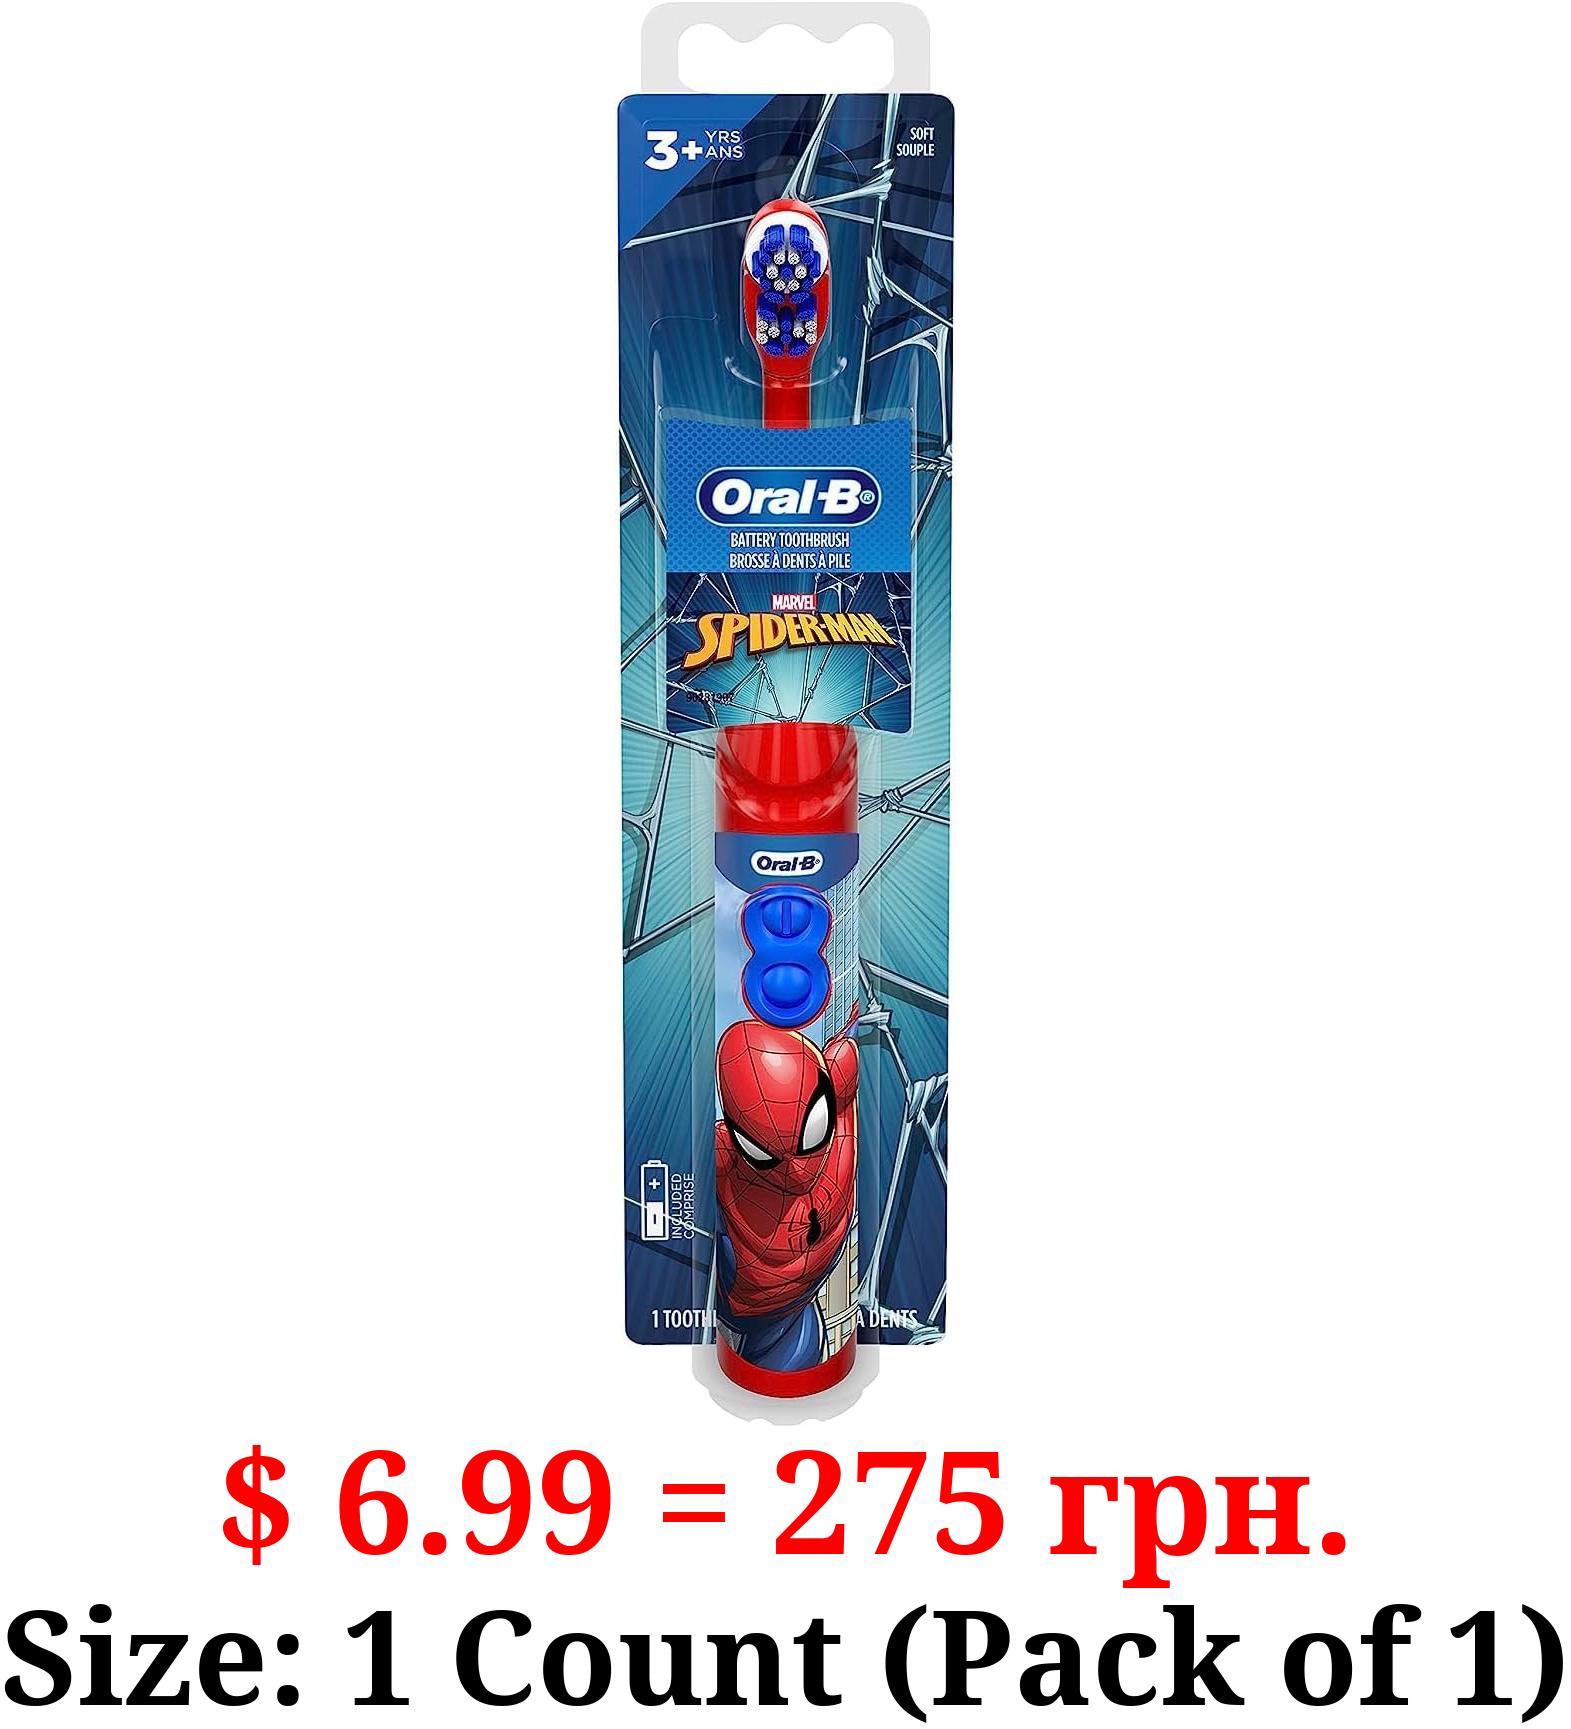 Oral-B Kid's Battery Toothbrush Featuring Marvel's Spiderman, Soft Bristles, for Kids 3+